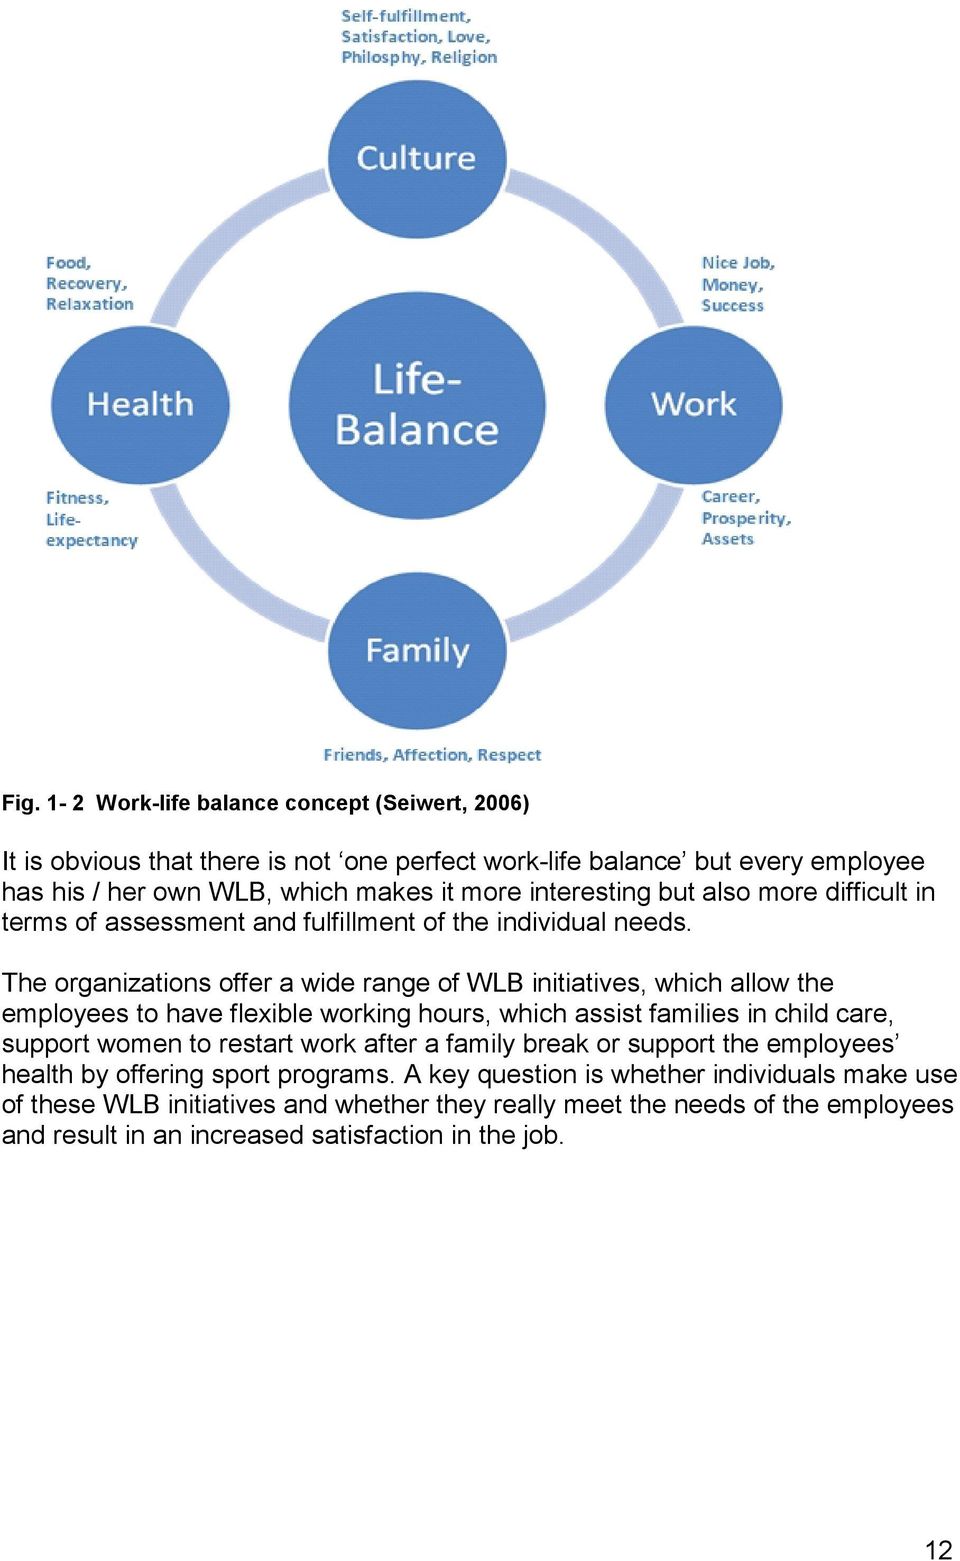 The organizations offer a wide range of WLB initiatives, which allow the employees to have flexible working hours, which assist families in child care, support women to restart